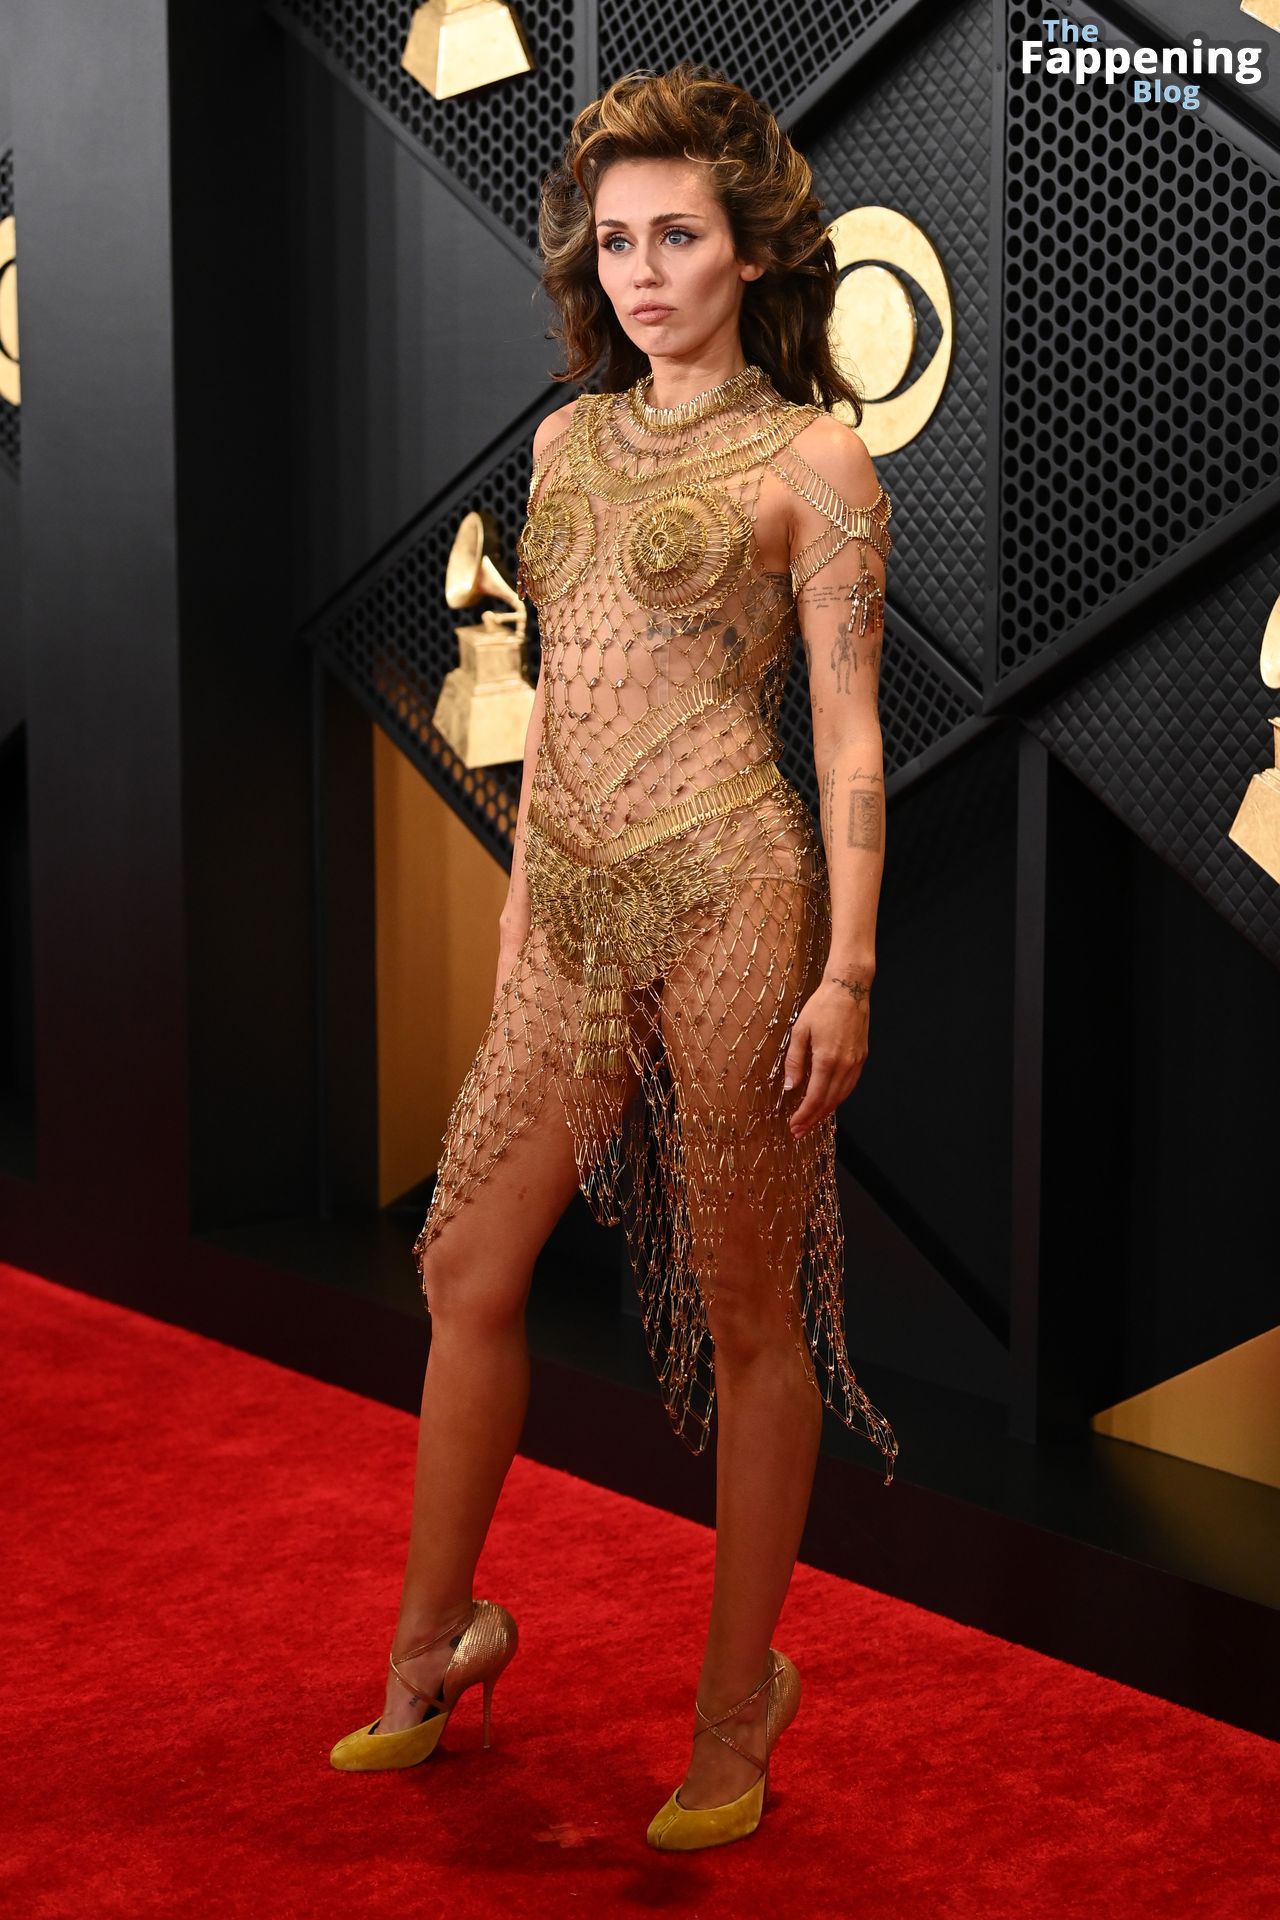 Miley Cyrus Looks Hot Without Underwear at the 66th Annual GRAMMY Awards (112 Photos)